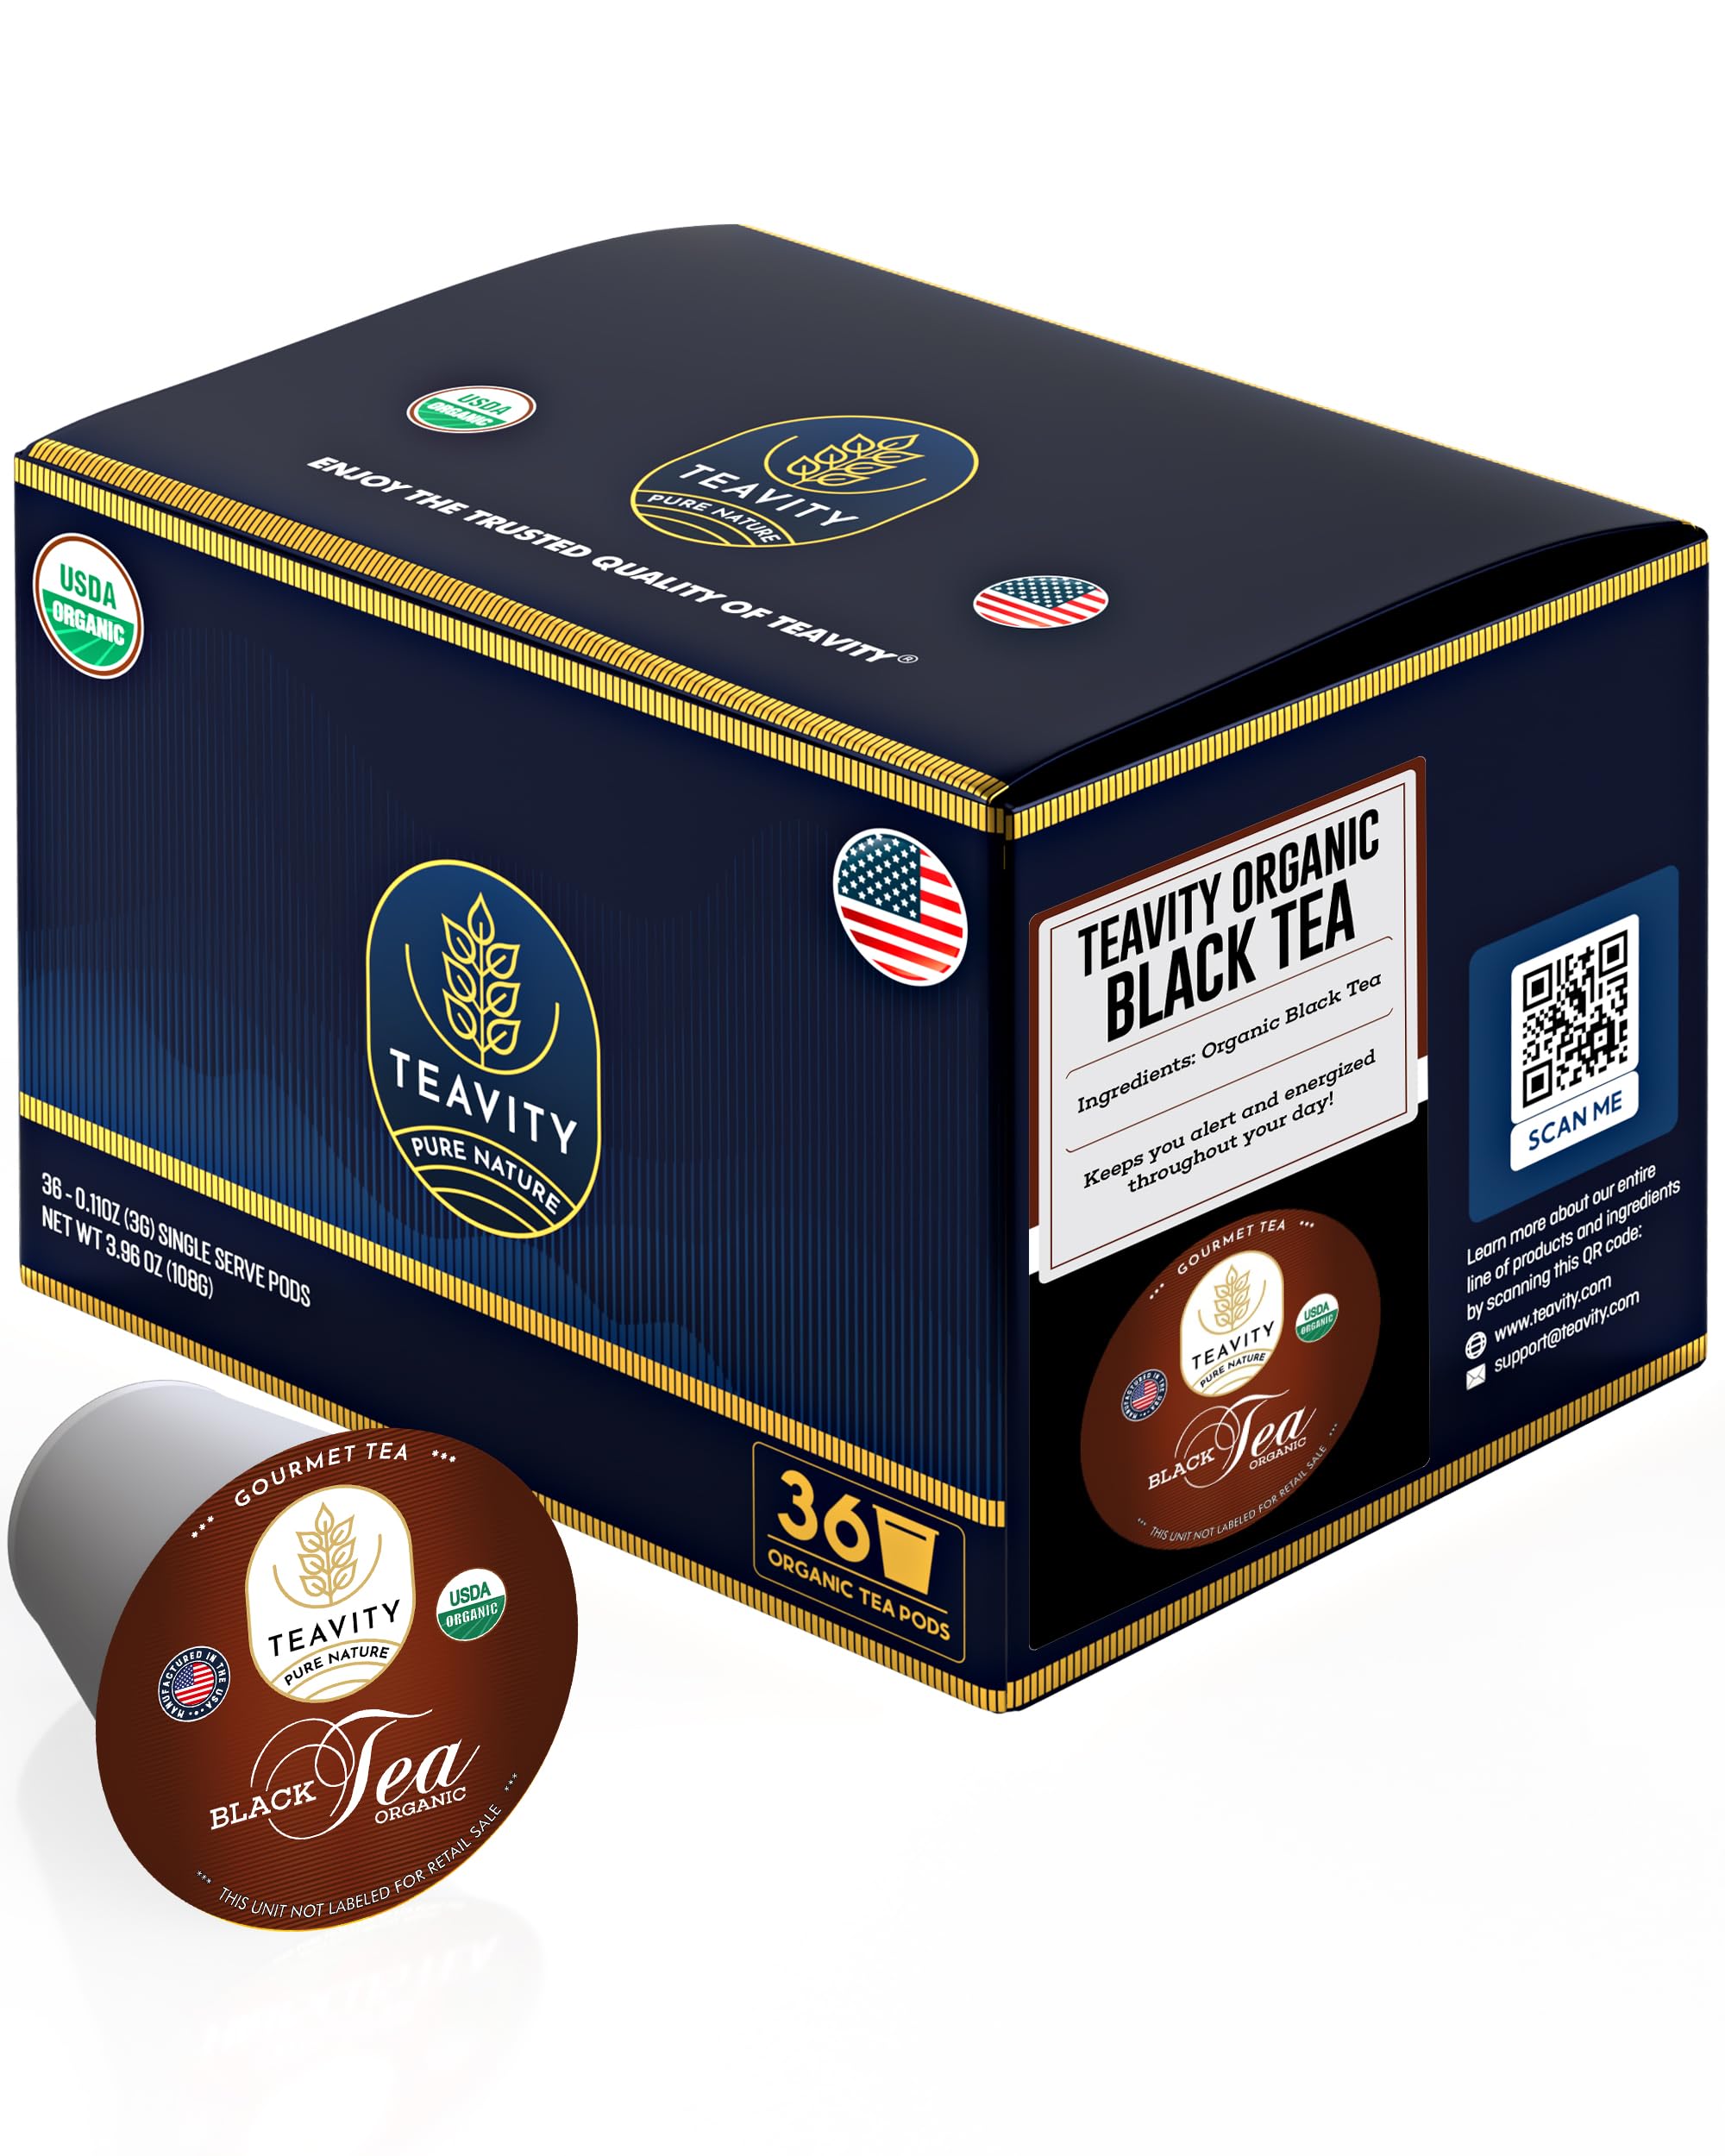 Organic Black Tea Pods for Keurig - Naturally Caffeinated Tea for KCup - Premium Unsweetened Black Tea for Hot Tea Brewing or Iced Tea by Teavity (36 Tea Pods)